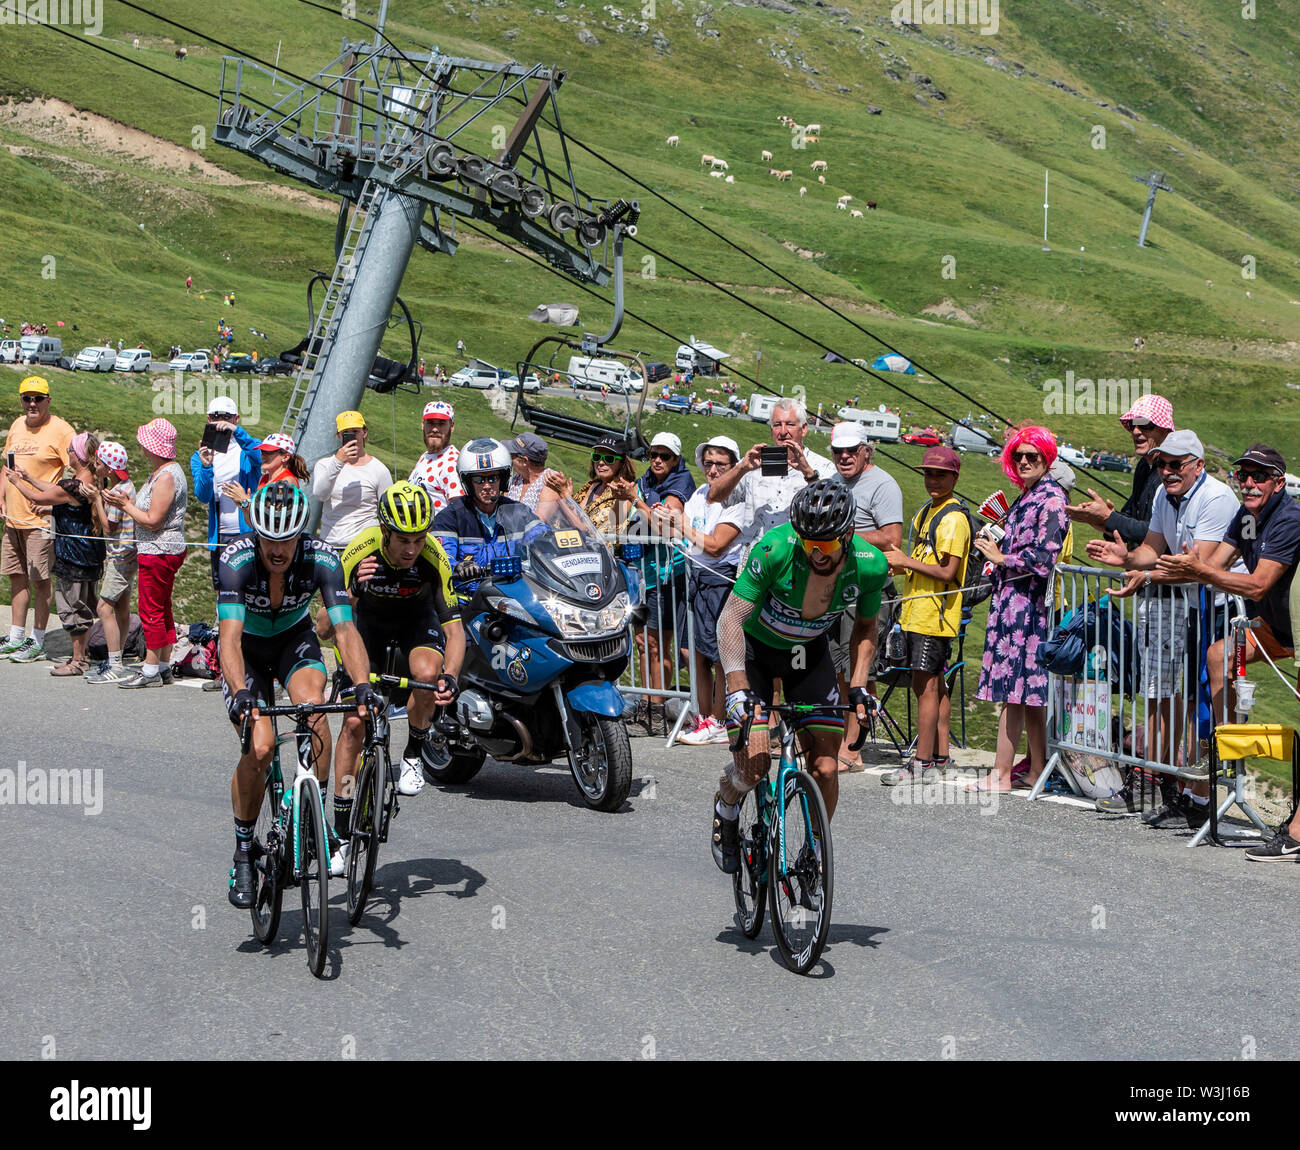 Col du Tourmalet,France-July 27,2018: Group of cyclists including Peter  Sagan in Green Jersey climbing the road to Col du Tourmalet during stage 19  of Tour de France 2018 Stock Photo - Alamy